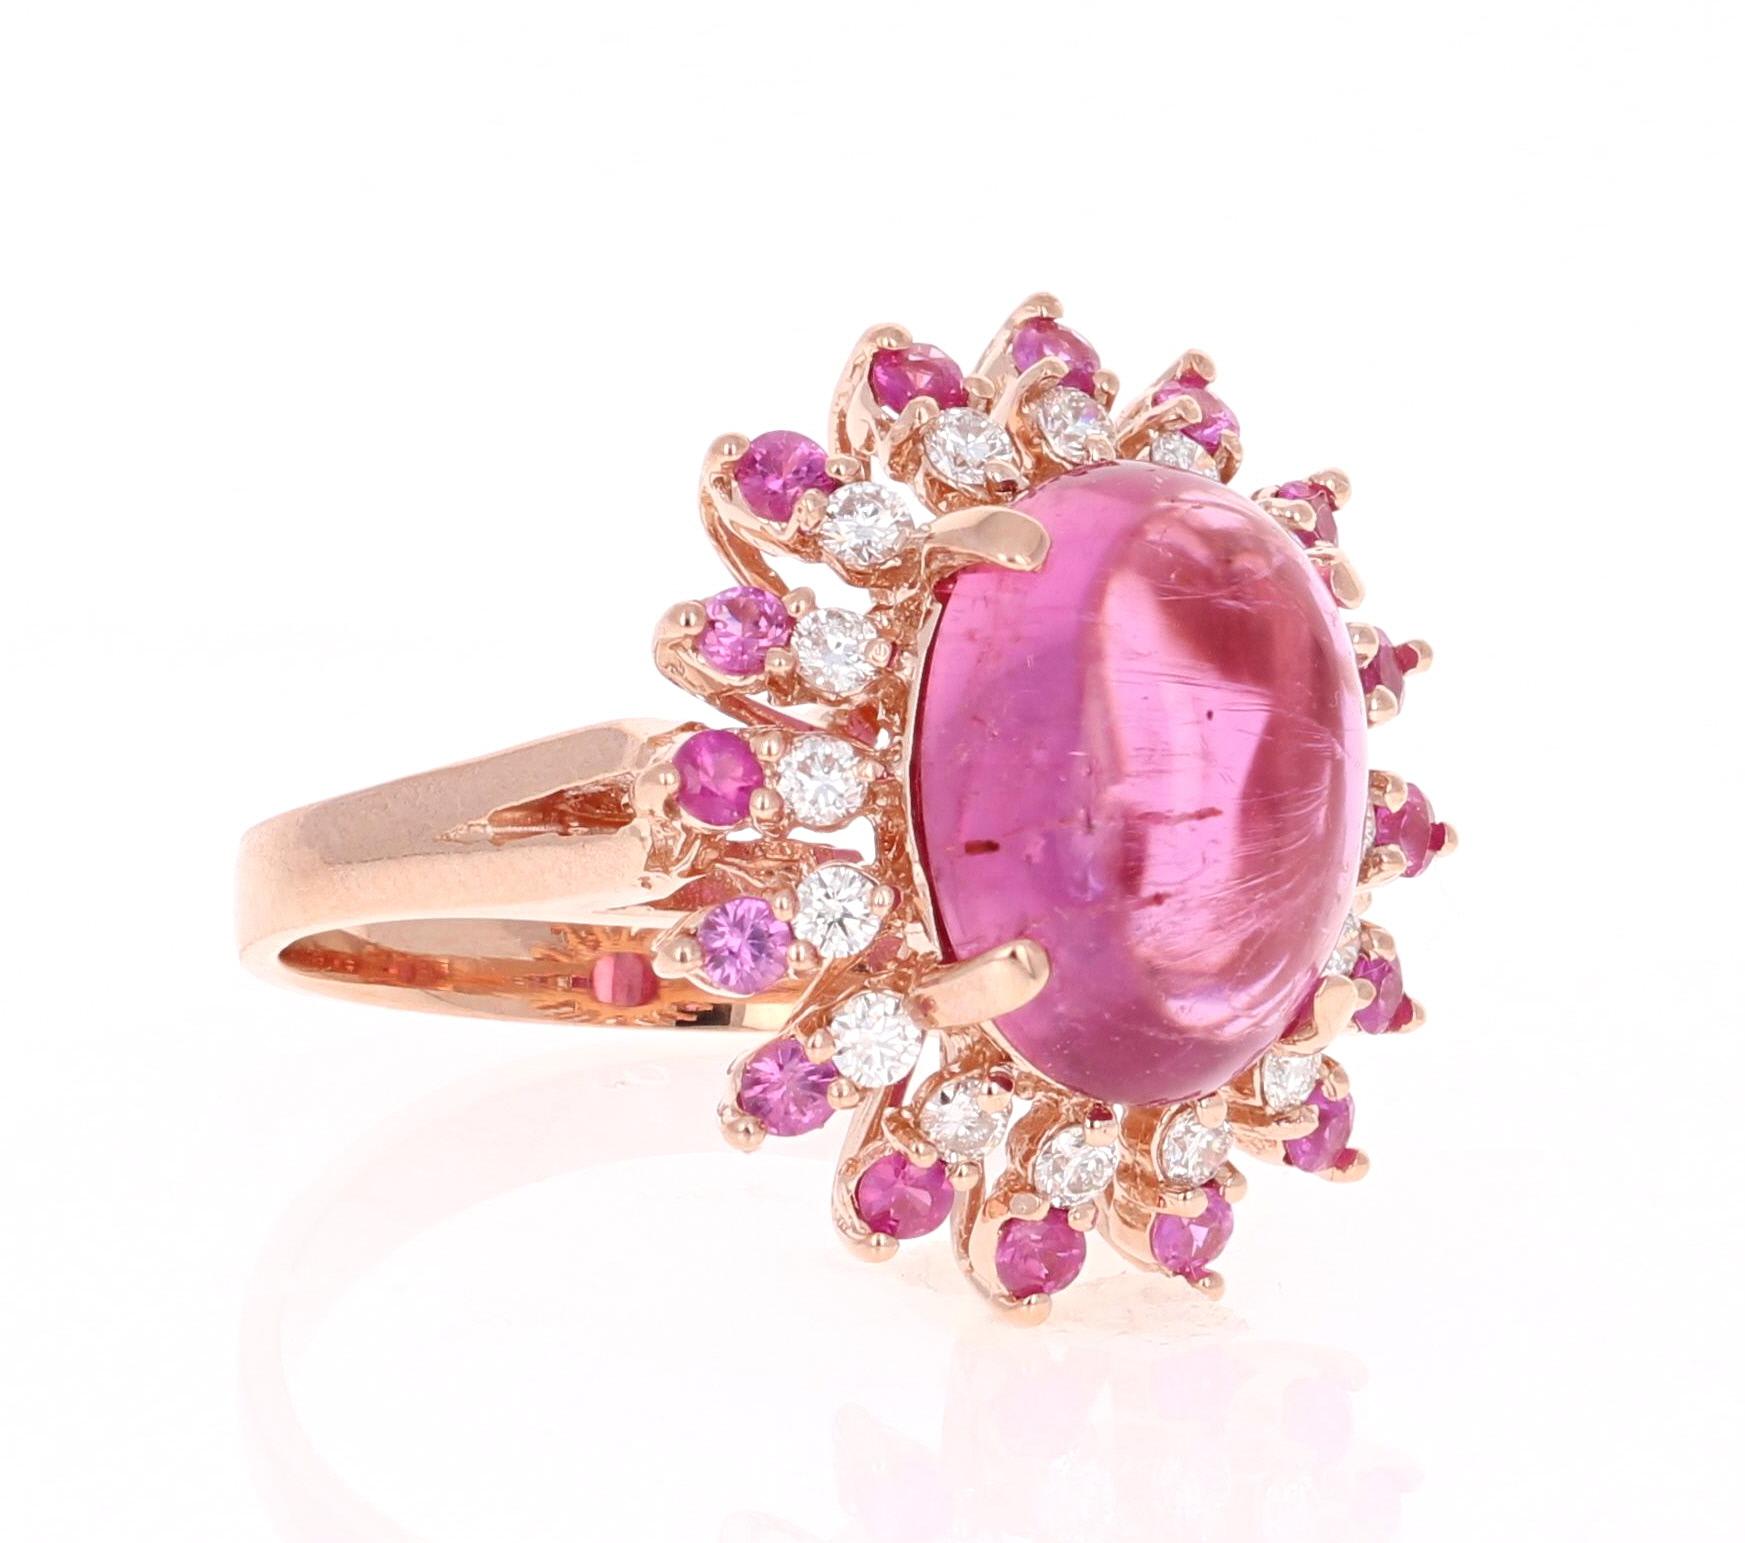 Stunning and uniquely designed 6.86 Carat Pink Tourmaline, Pink Sapphire and Diamond Rose Gold Cocktail Ring! 

This ring has a 5.86 carat Oval Cut Cabochon Pink Tourmaline that is set in the center of the ring and is surrounded by 16 Round Cut